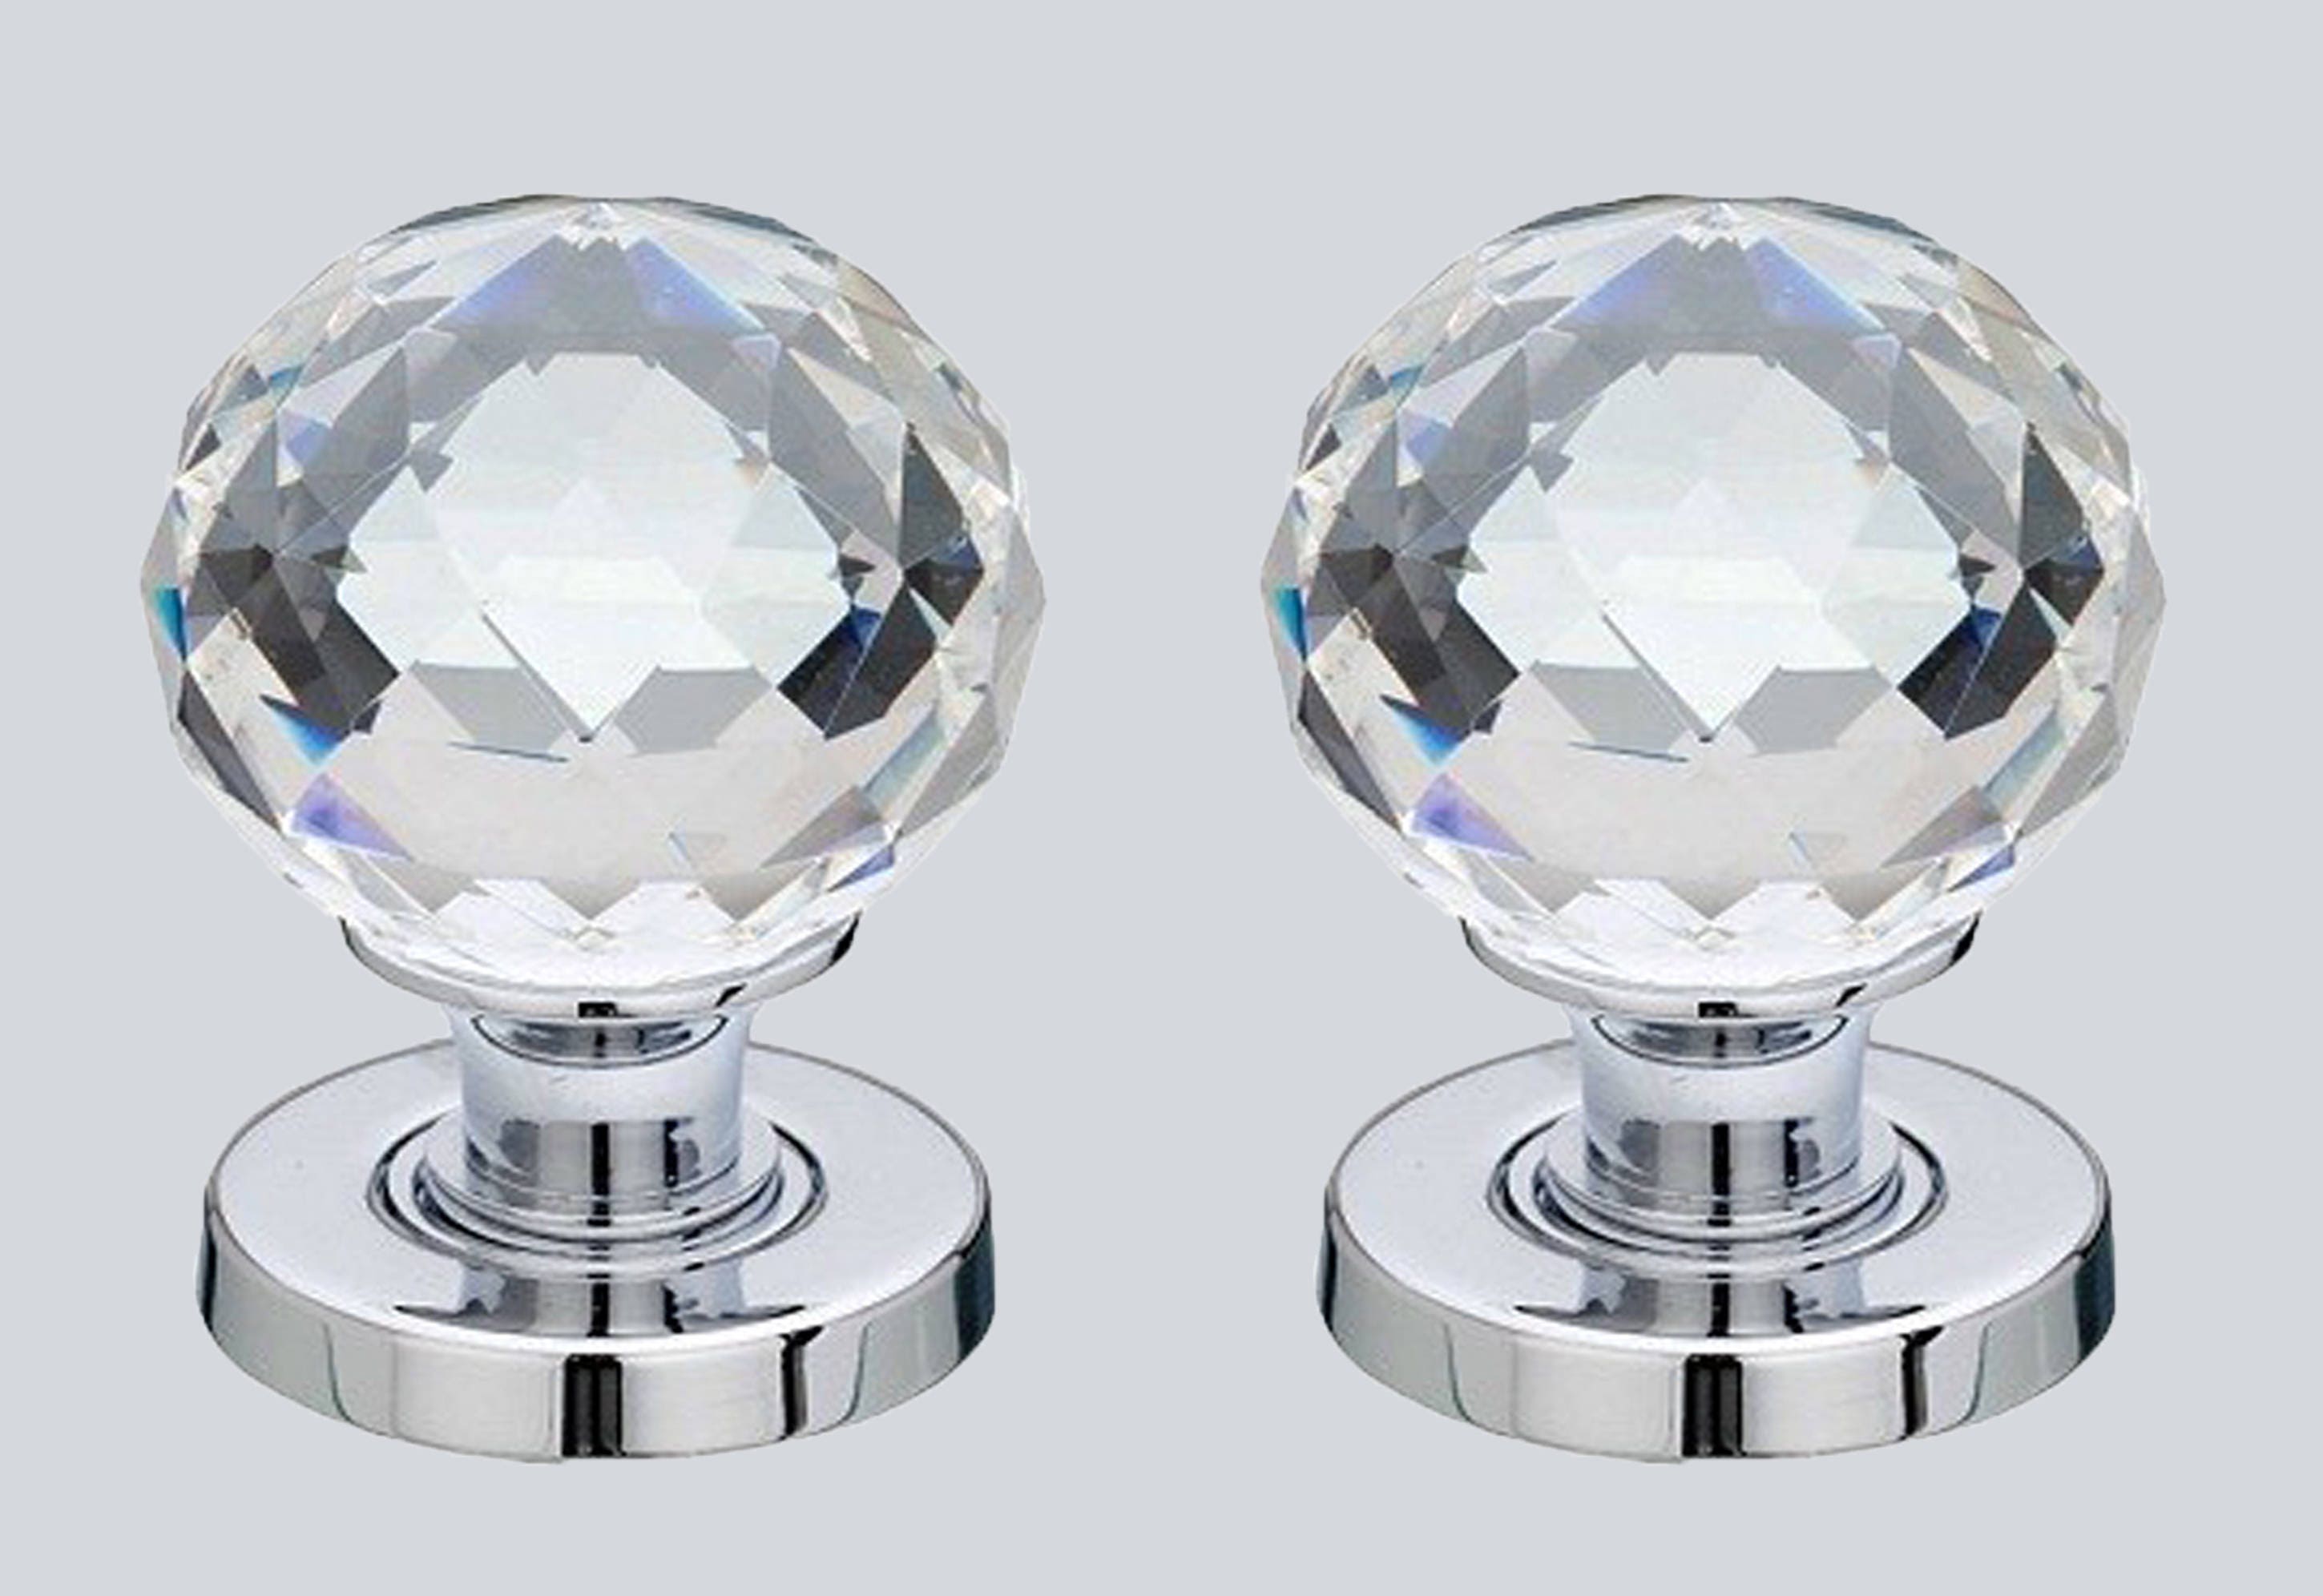 LIVIVO Set of 10 Crystal Glass Door Knobs - Diamond Drawer Knobs for  Kitchen & Bedroom Cabinets